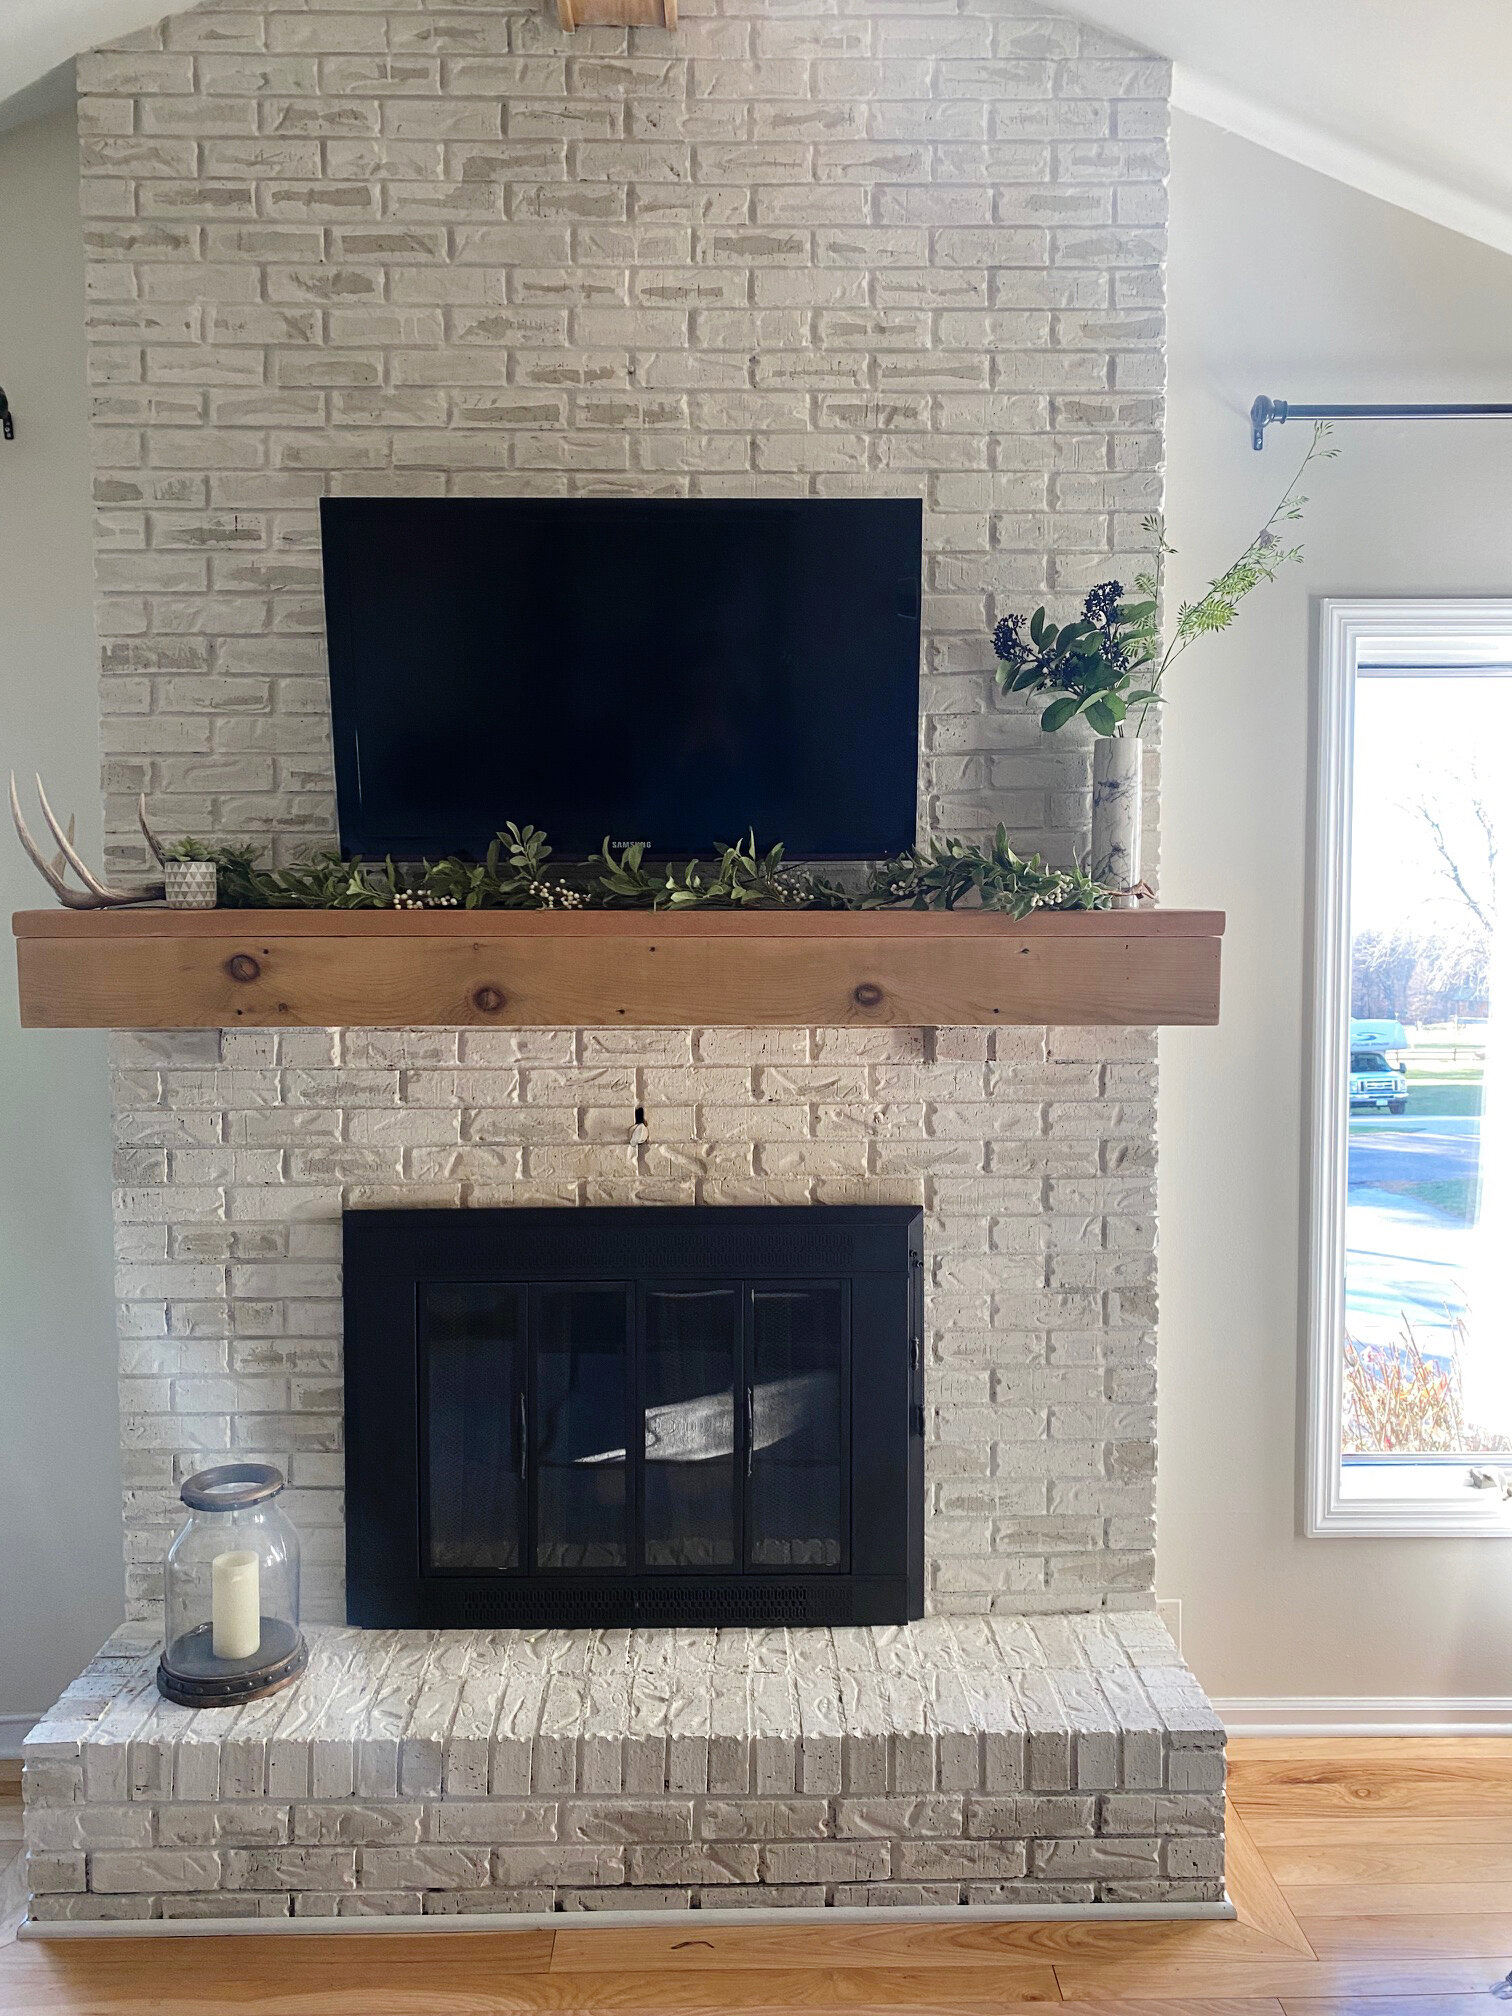 How To Mount A Tv Over Brick Fireplace, How To Hang A Tv Above Brick Fireplace